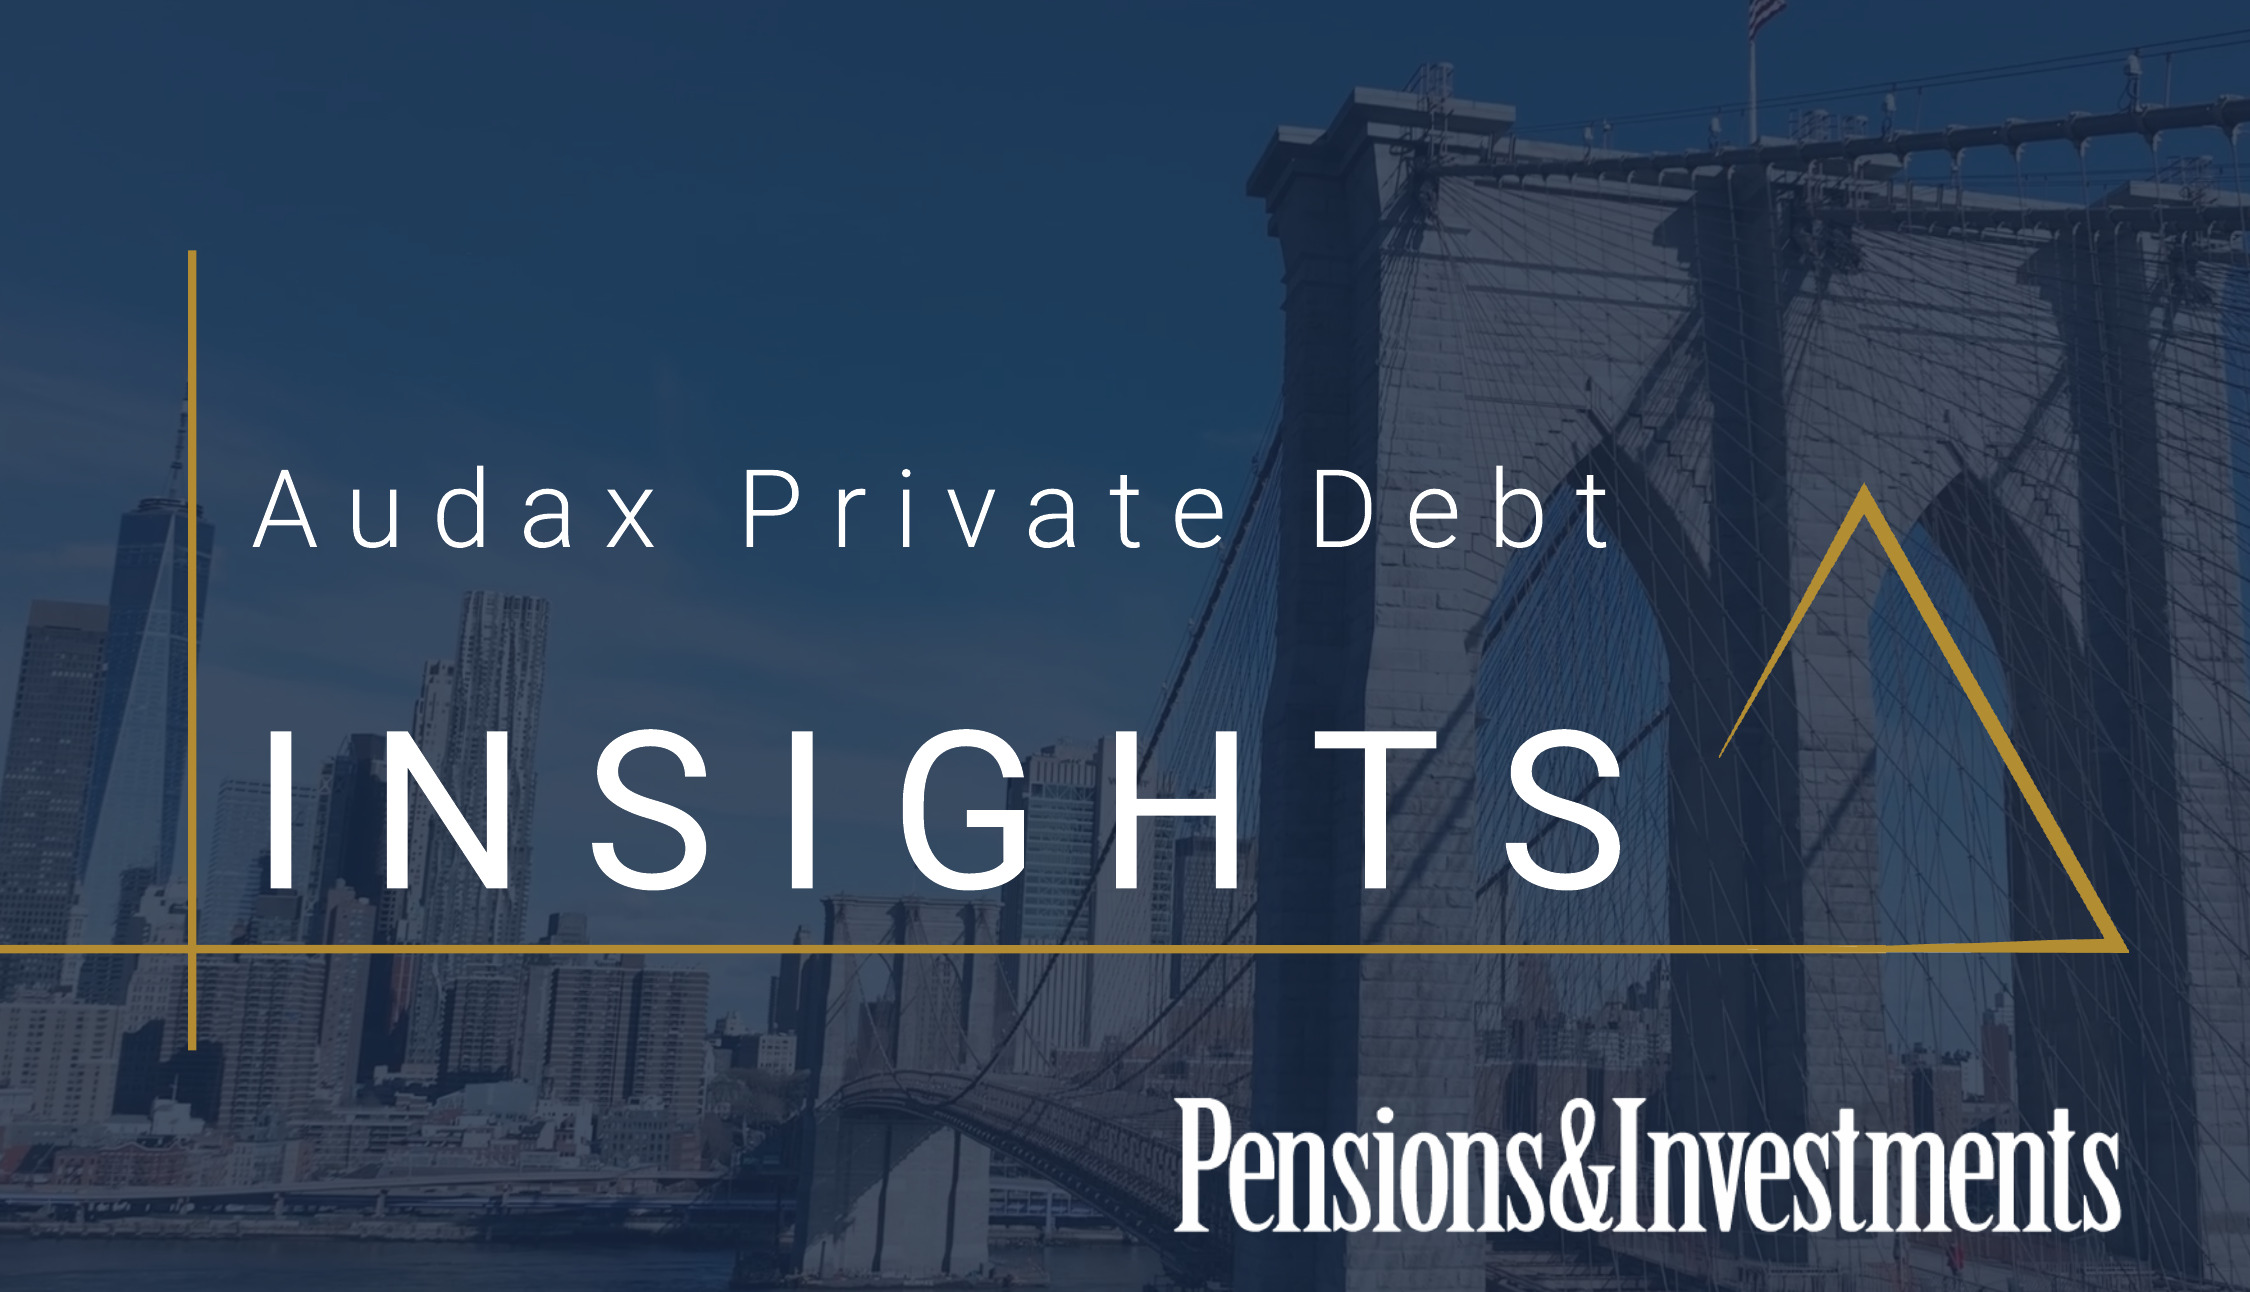 Audax Private Debt Pensions And Investments Senior Debt The Overshadowed Opportunity Now